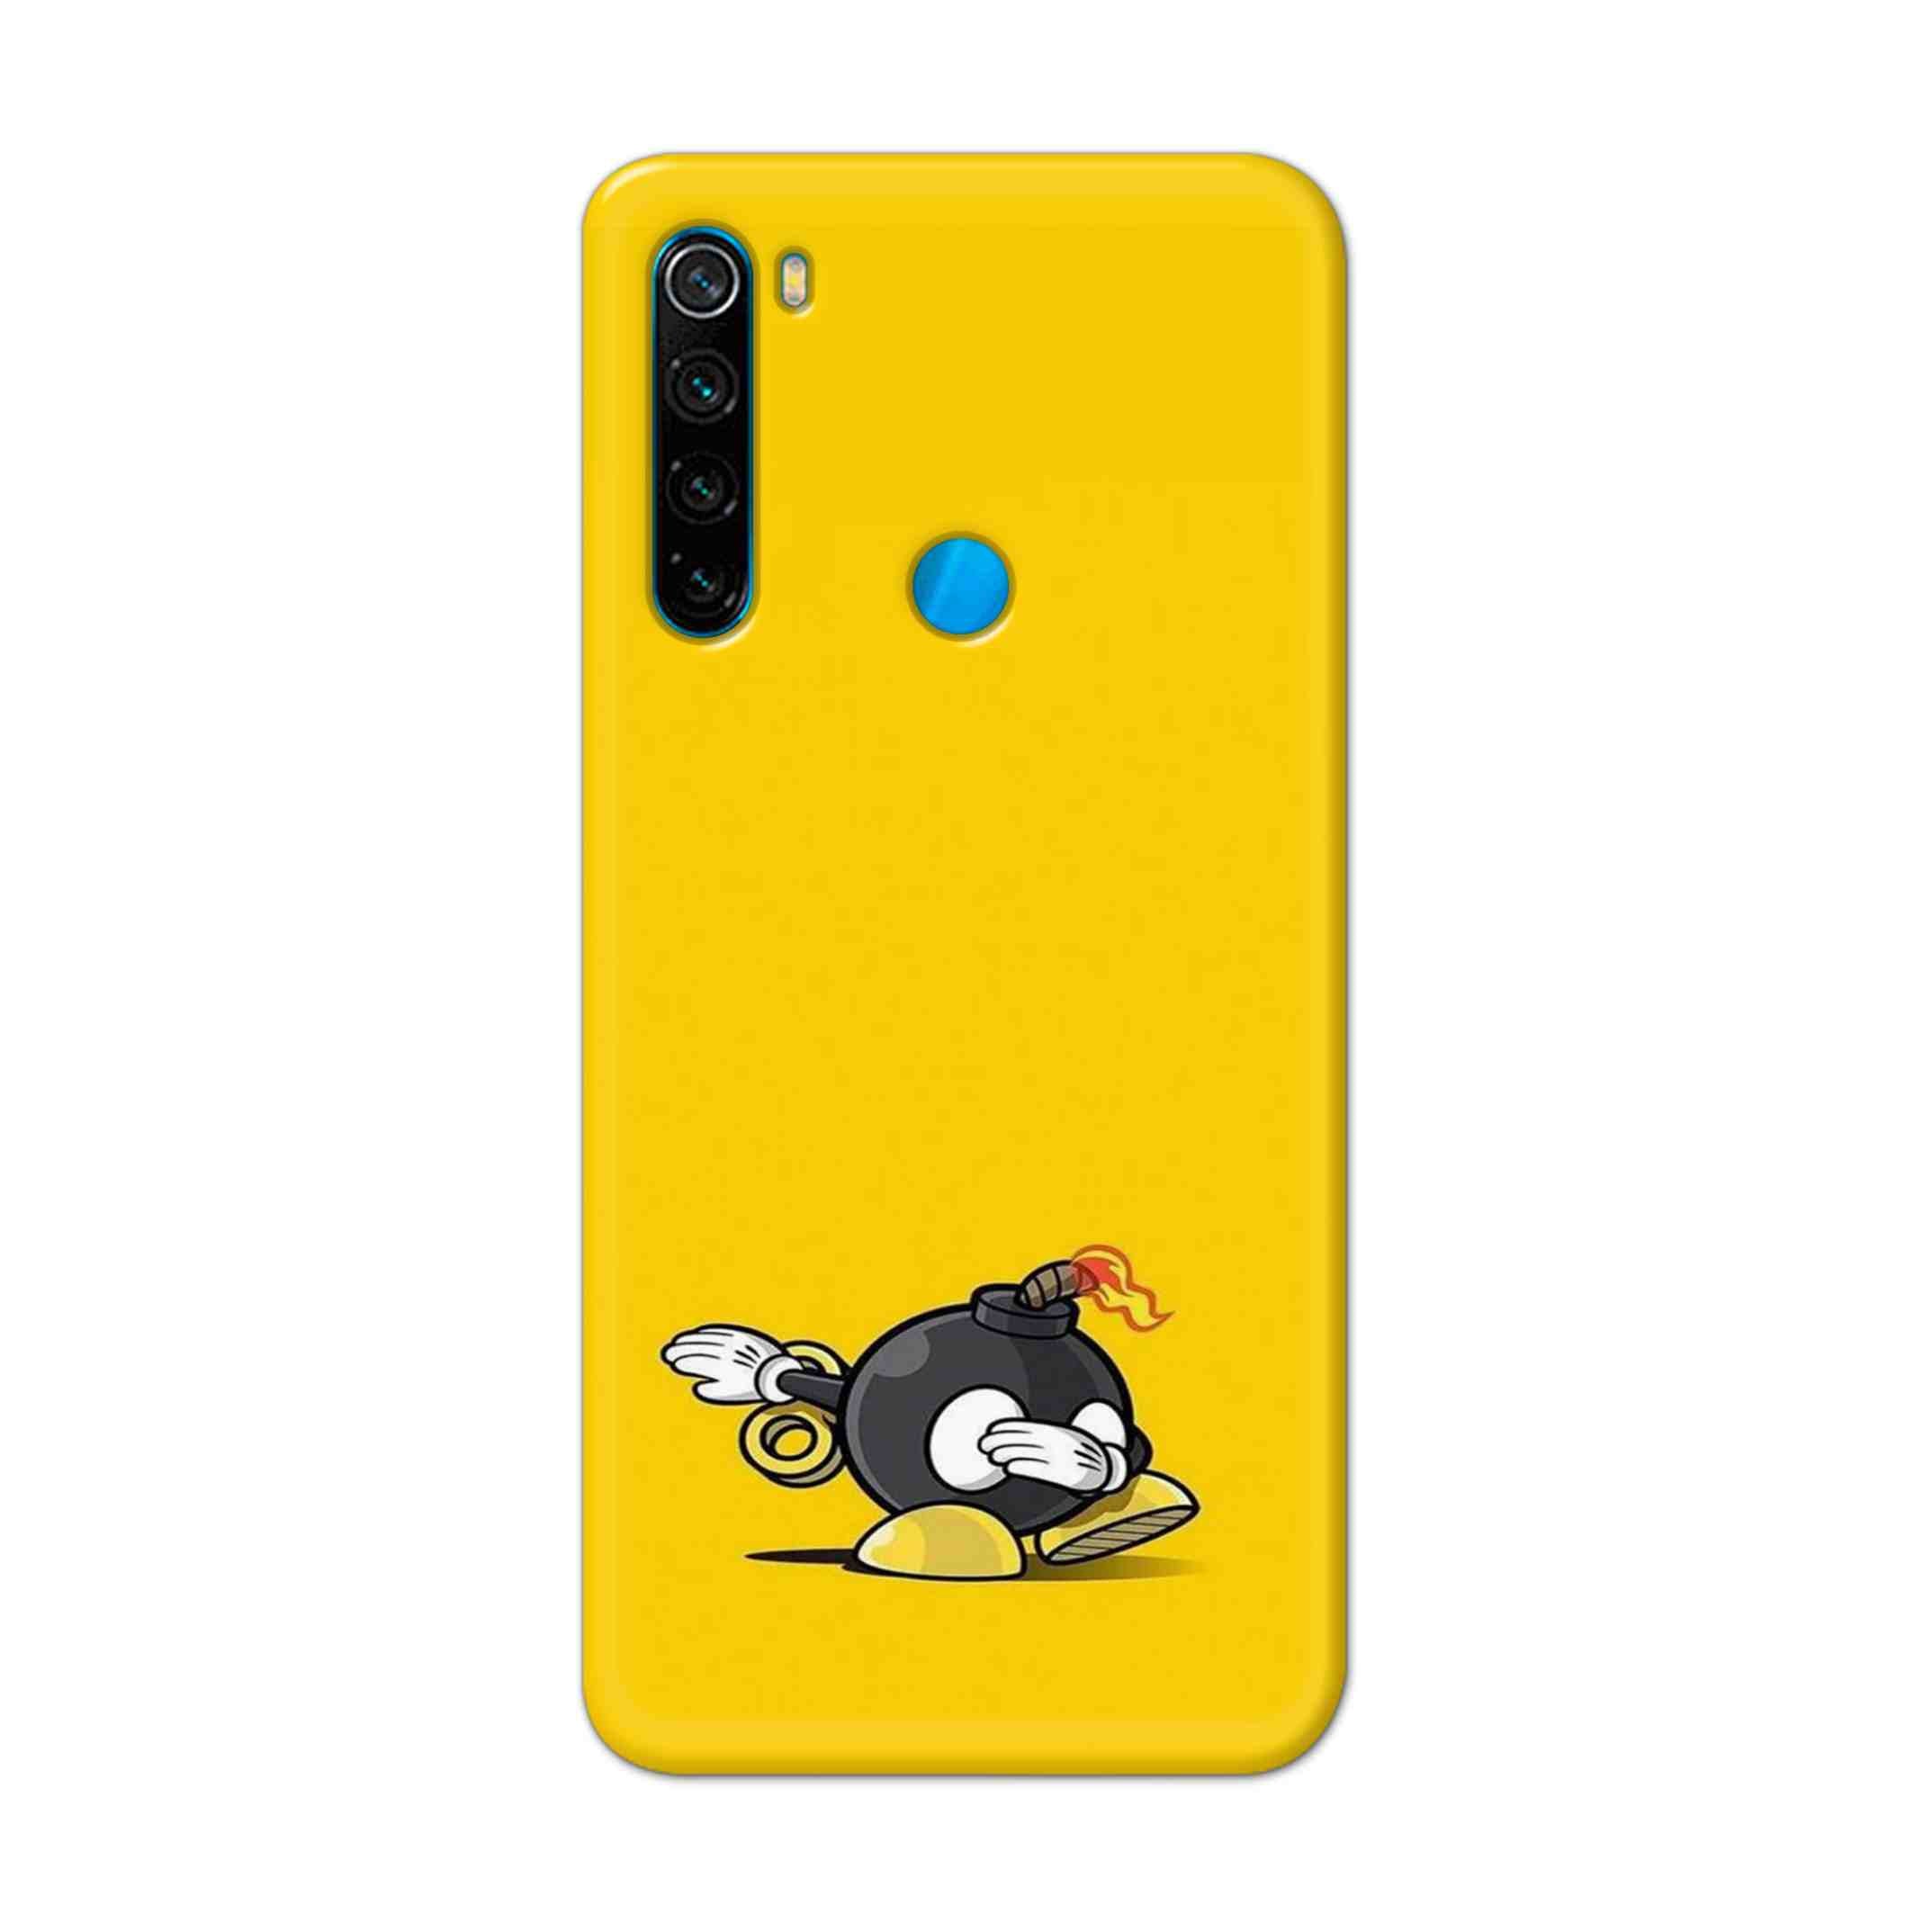 Buy Dashing Bomb Hard Back Mobile Phone Case Cover For Xiaomi Redmi Note 8 Online